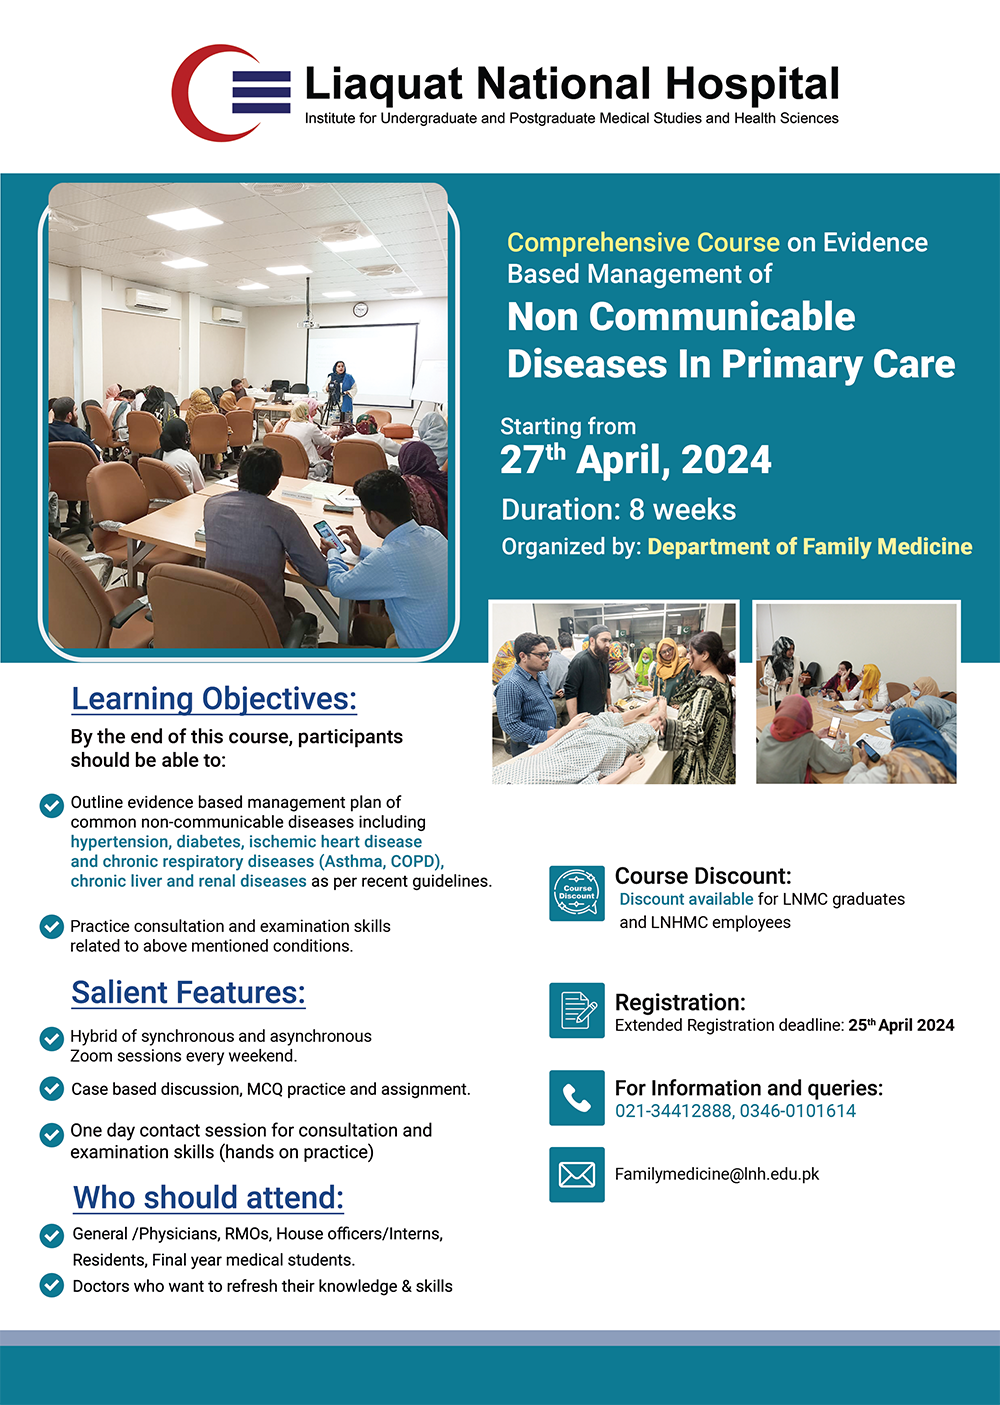 Comprehensive Course on Evidence Based Management of Non-communicable Diseases in Primary Care